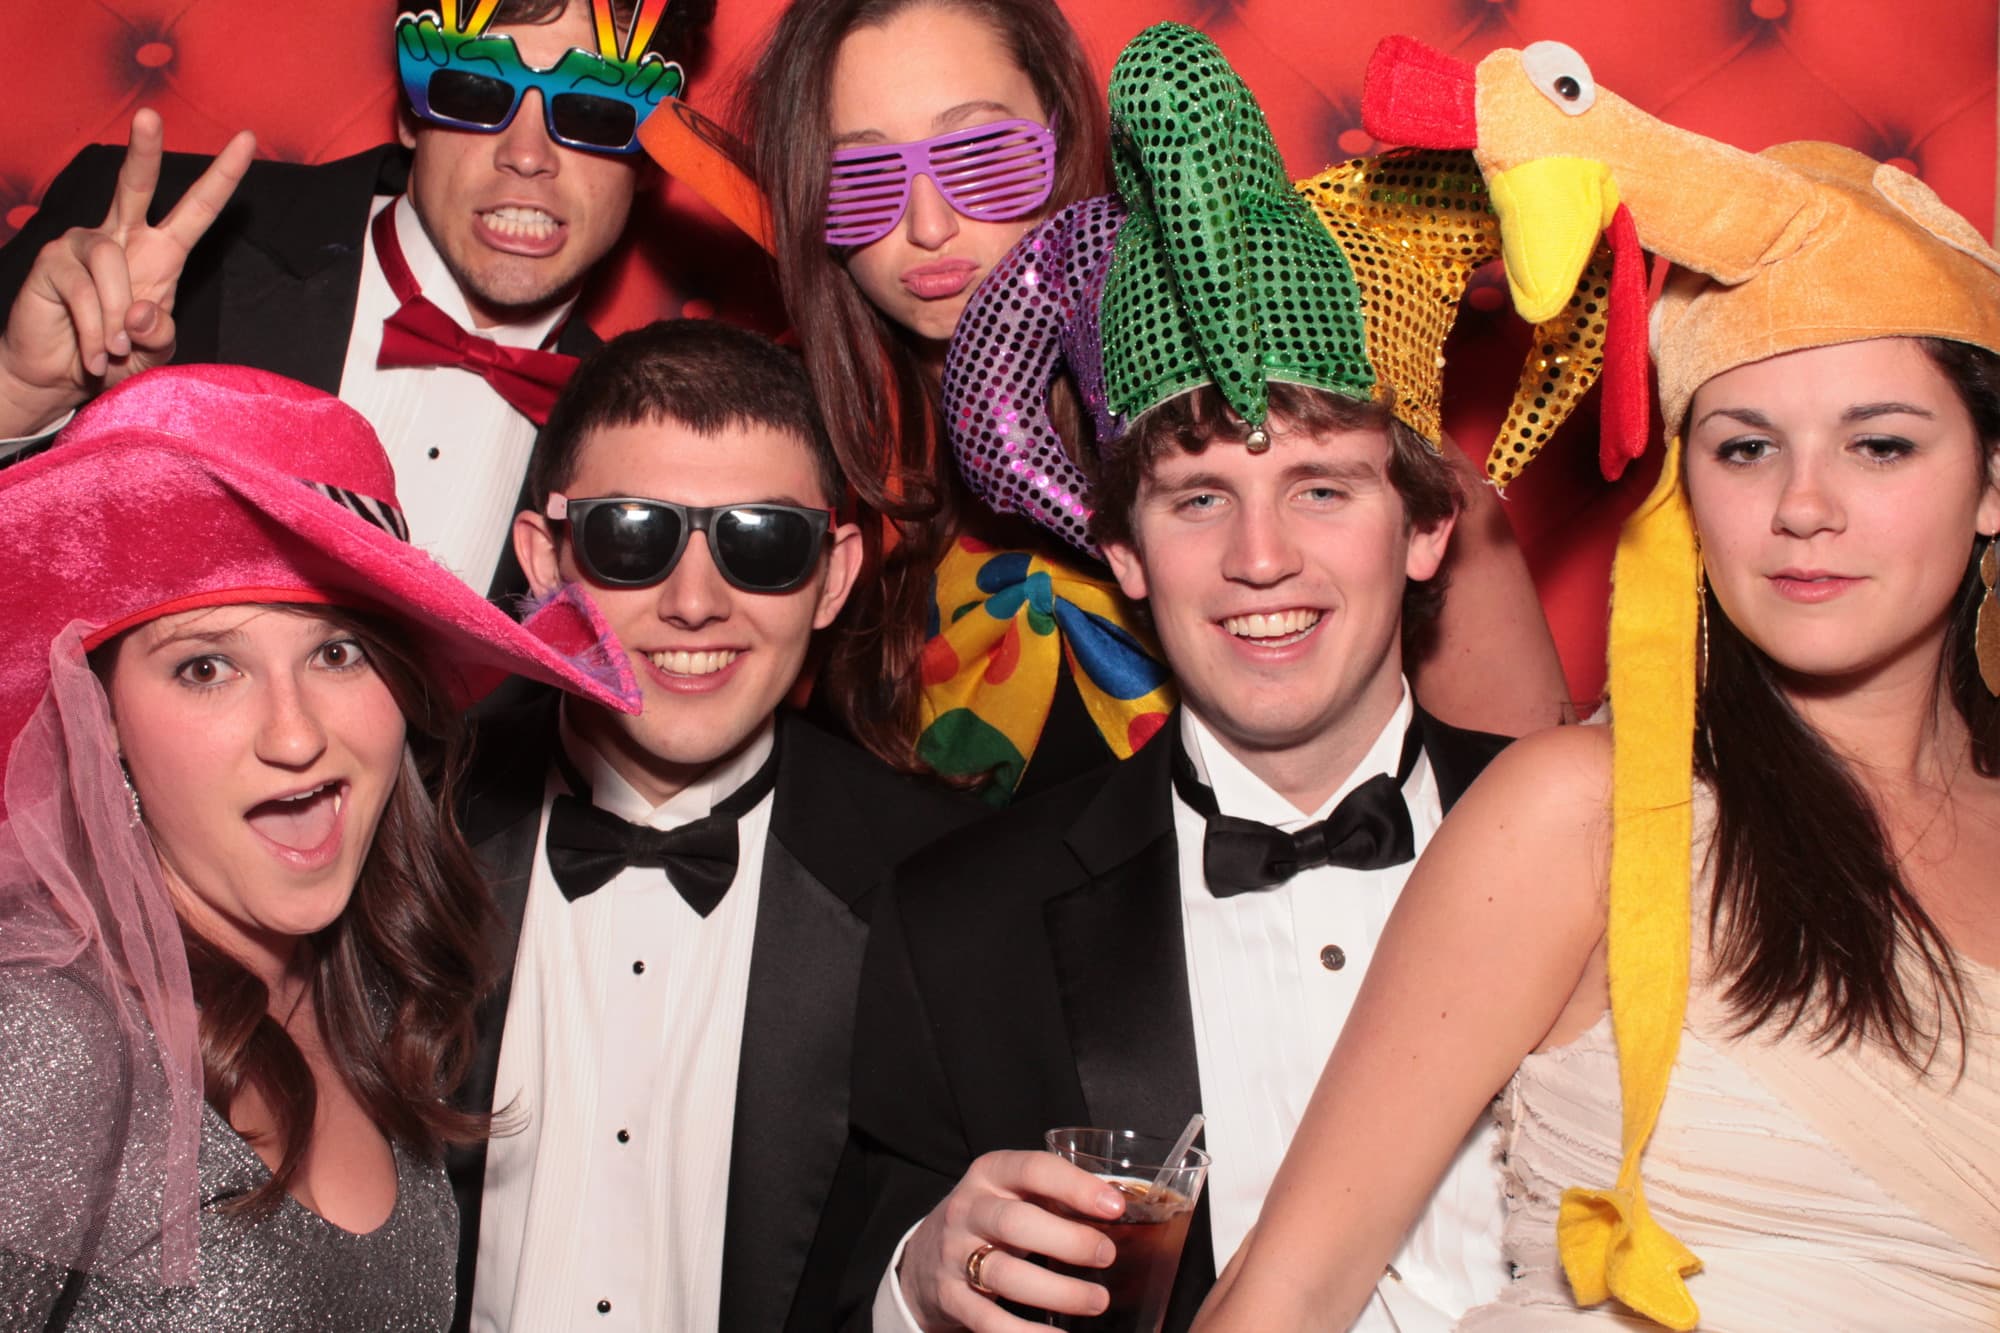 Photo Booth-Rental-College-Fun-Groups-Fun-Props-Large-Colorful-Photography-Party